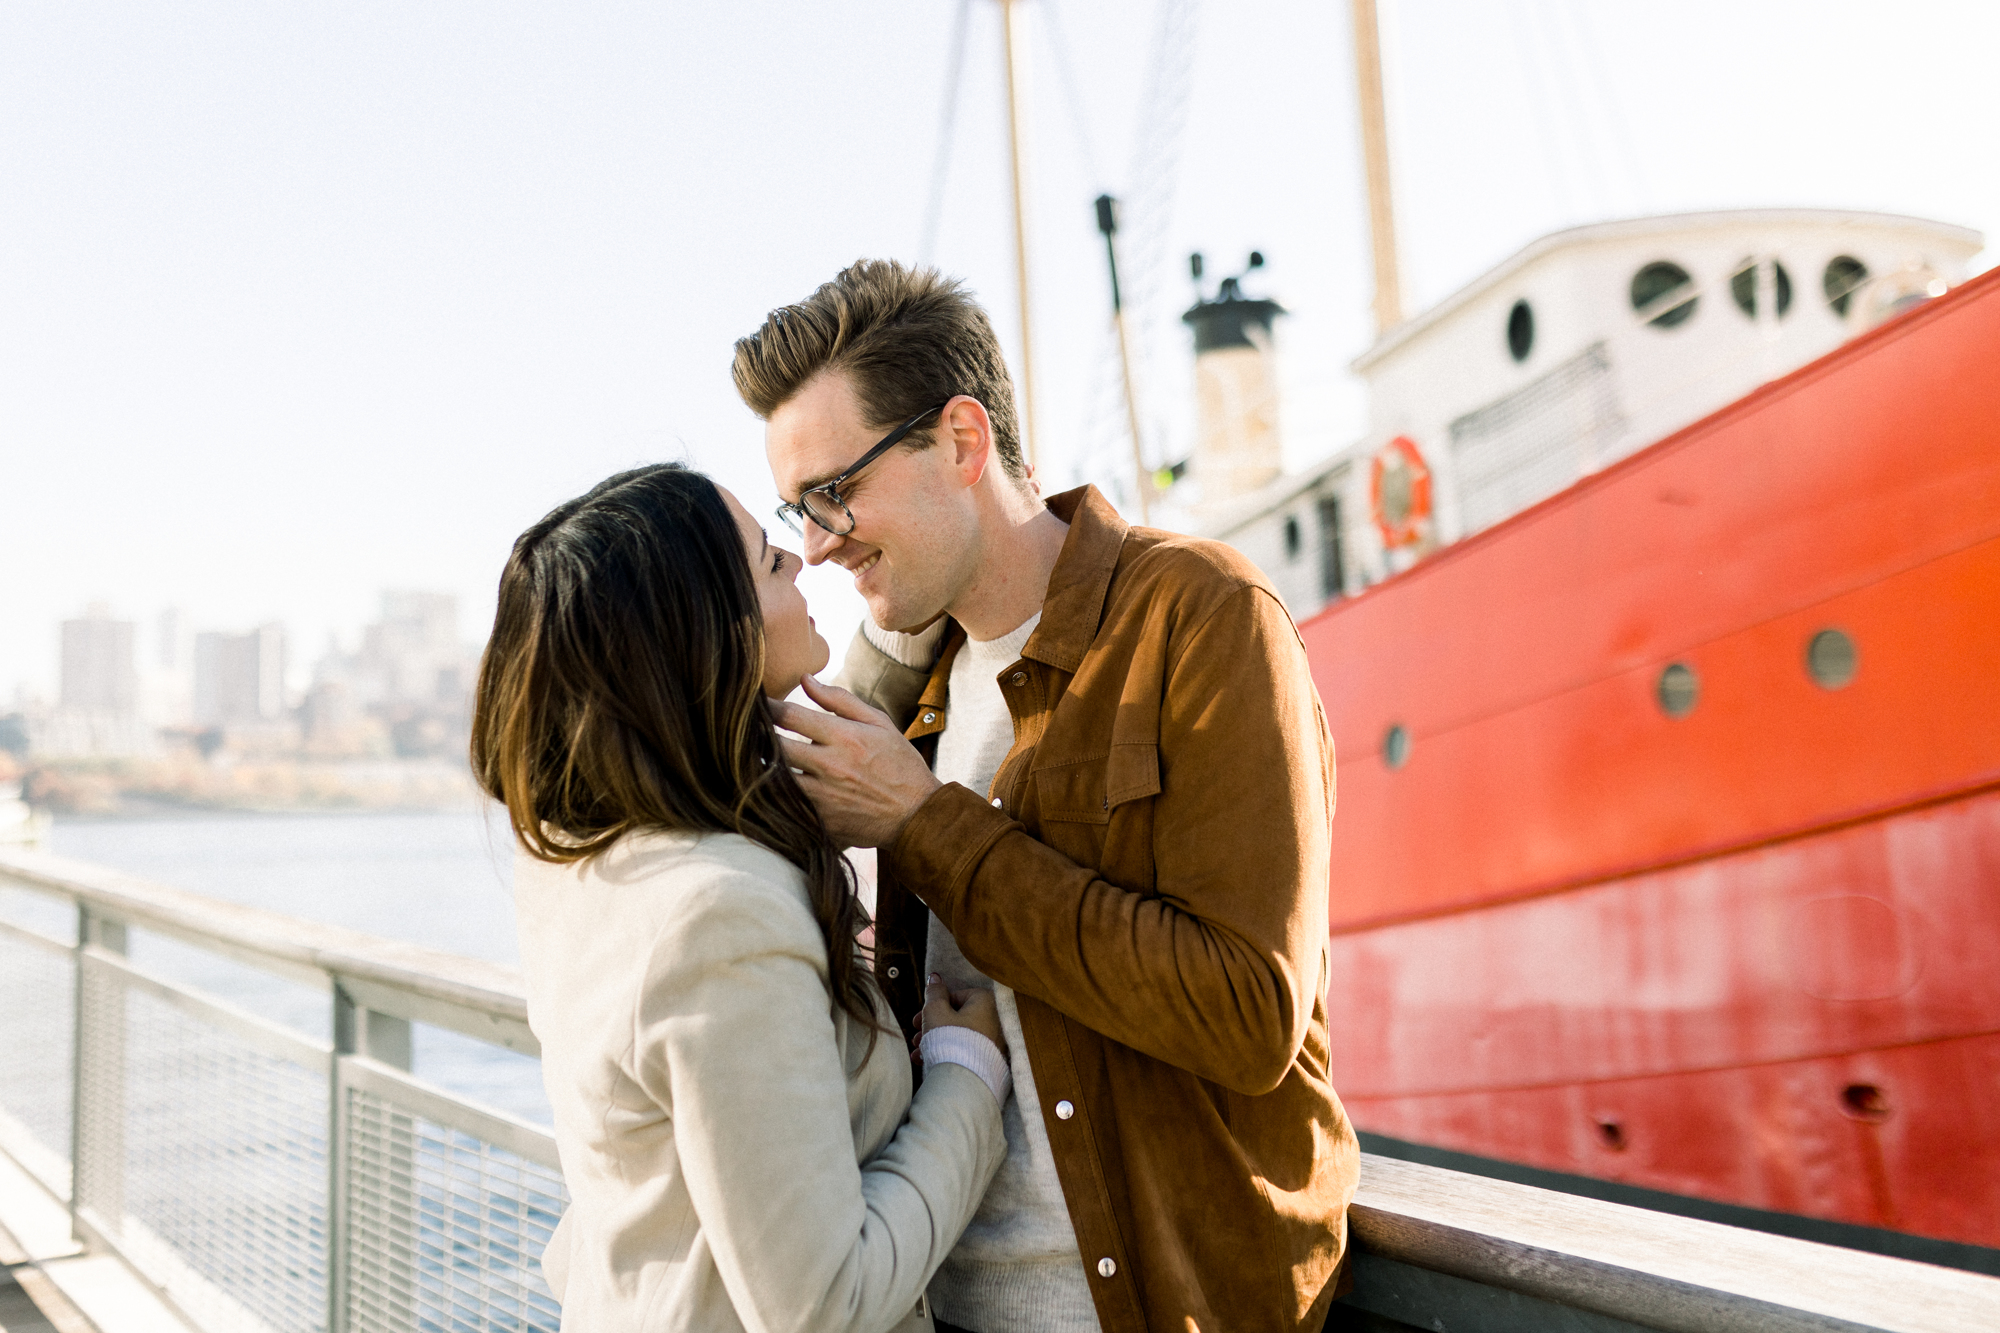 Picturesque Fall-Themed South Street New York Engagement Photos Near Pier 17 